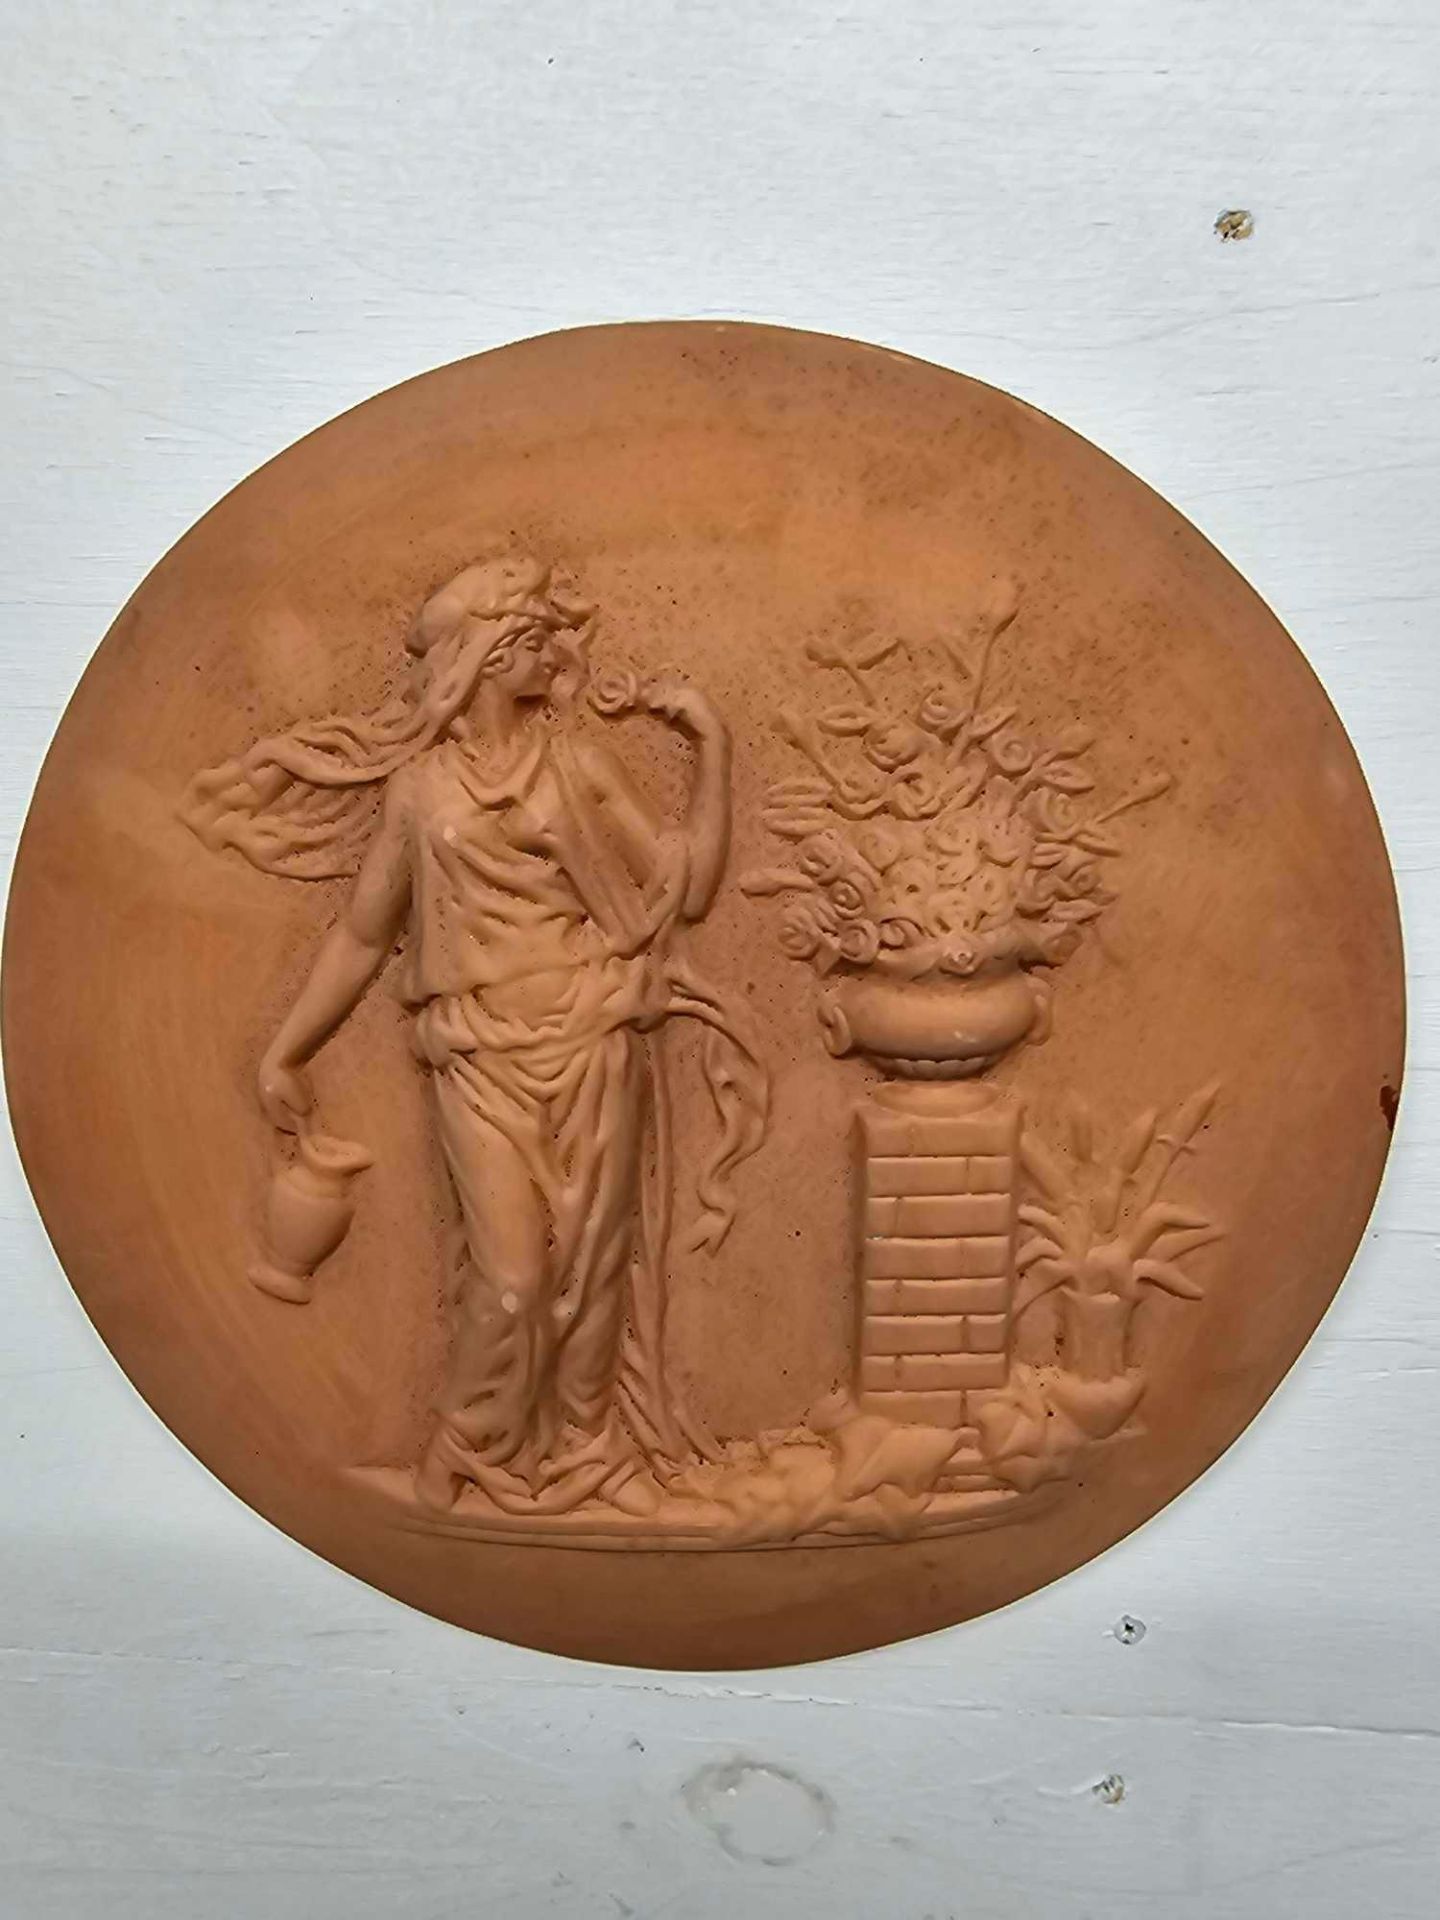 A Set Of 3 x Terracotta Wall Plaques Each With A Classic Relief Scene1 x 33 x 33 And 2 x 34 x 39cm - Image 2 of 6